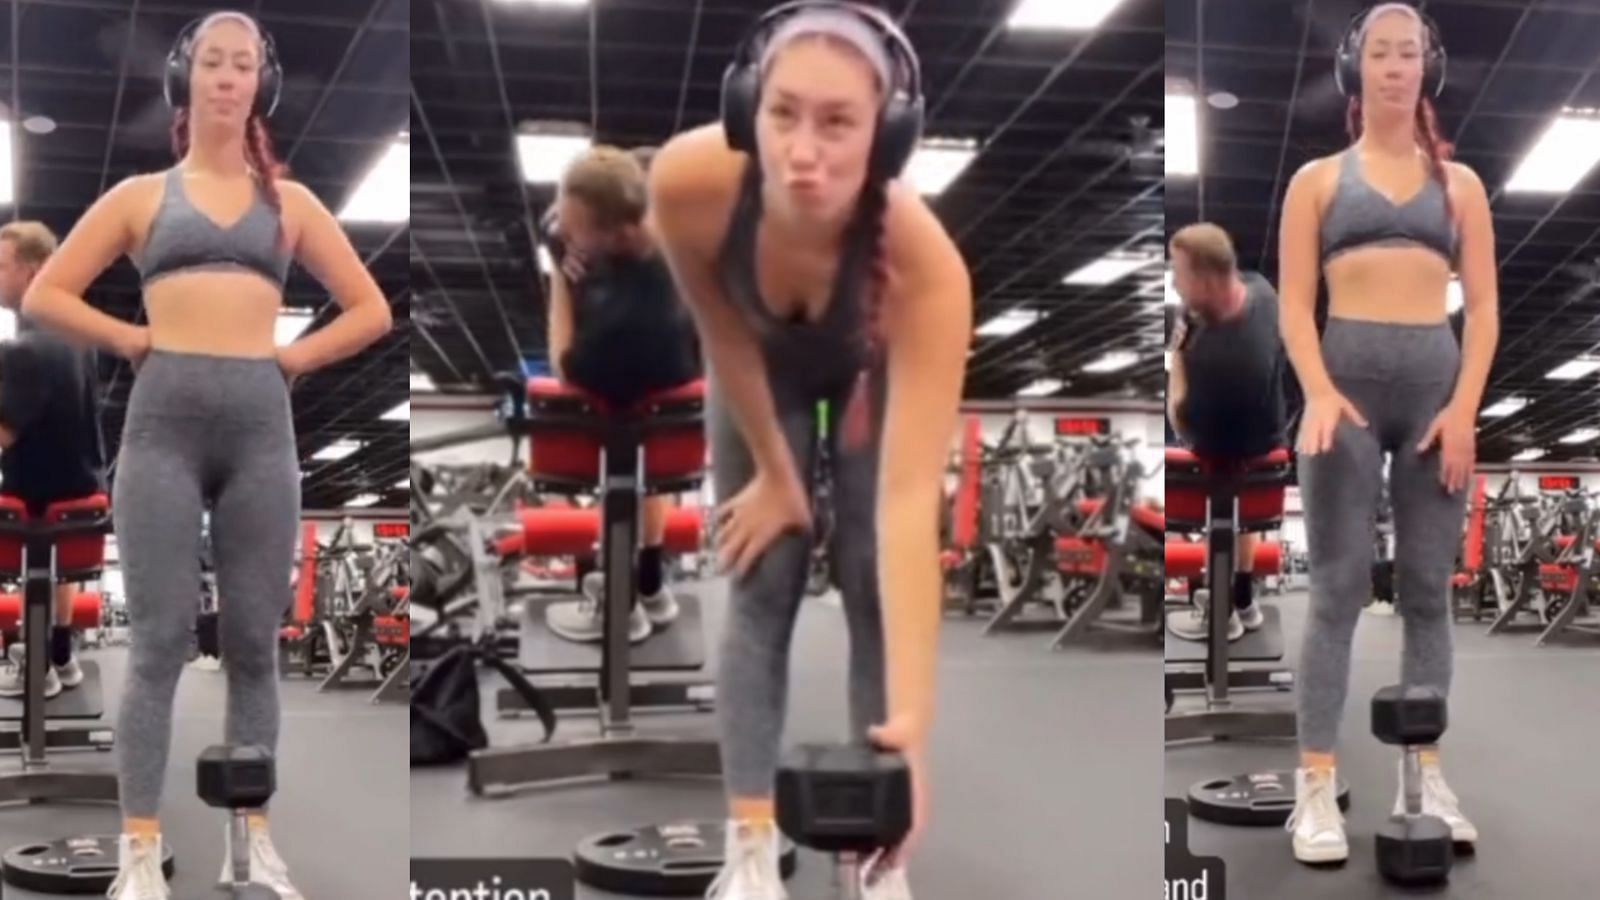 Woman in the gym shames another person for working out (Image via Instagram)